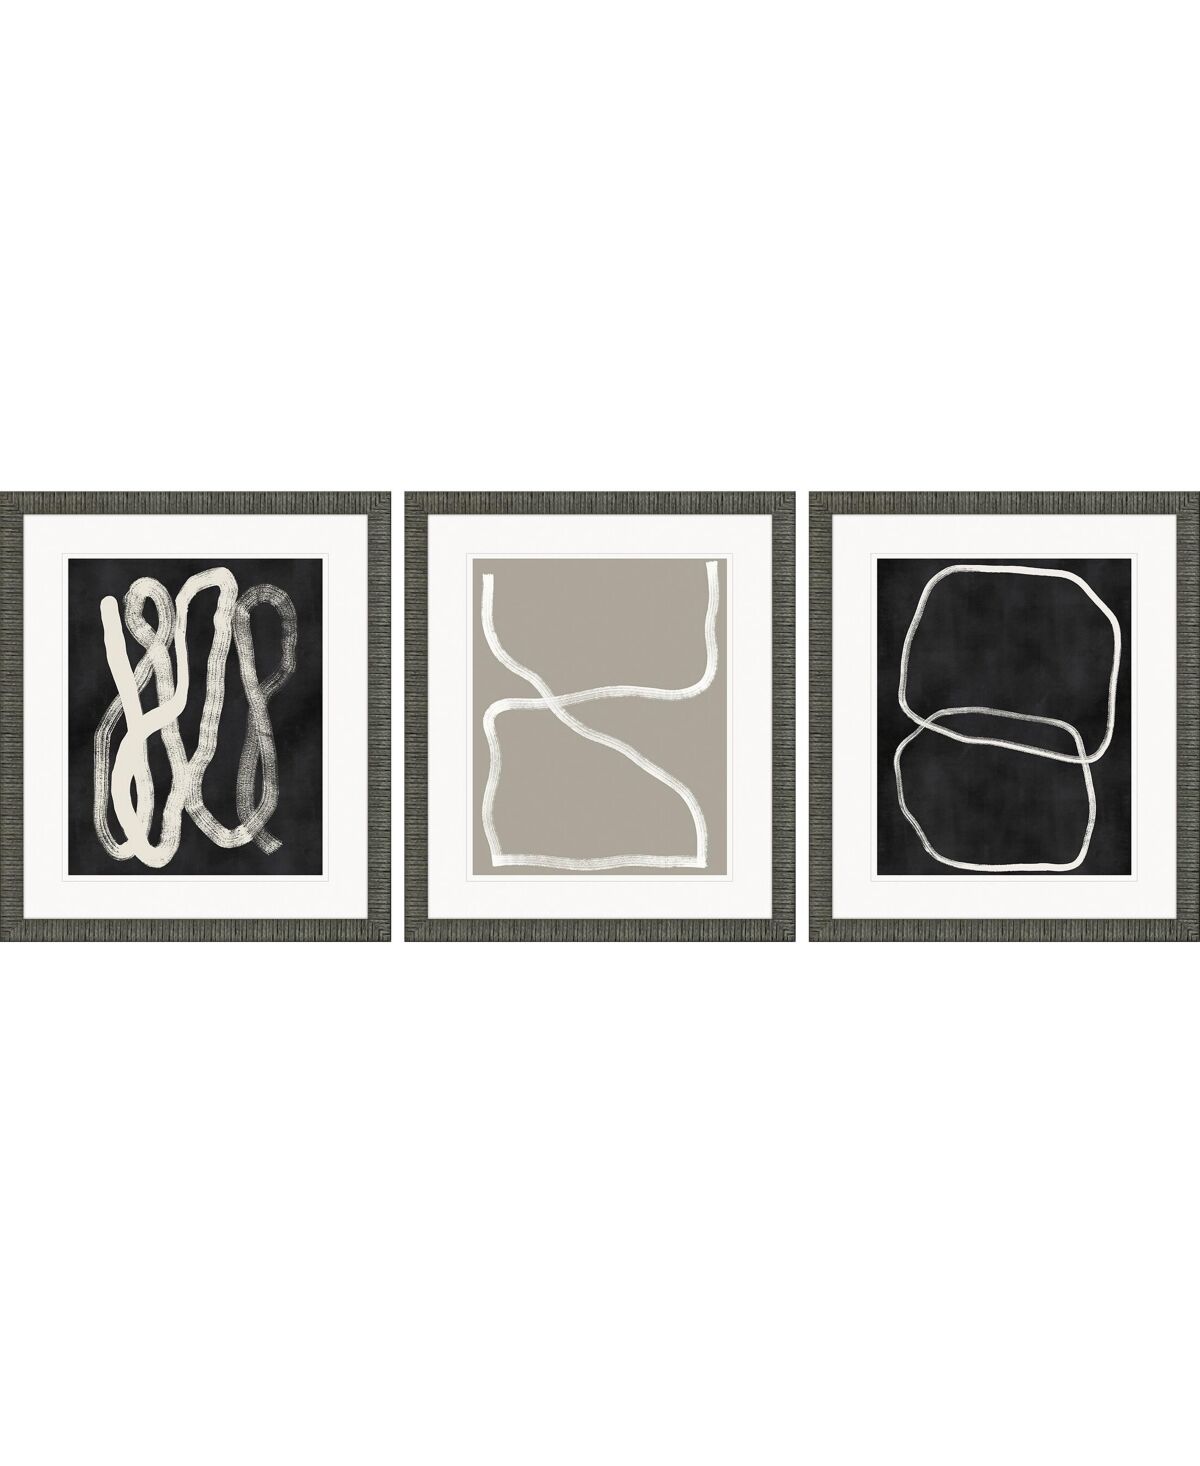 Paragon Picture Gallery Naive Lines Ii Framed Art, Set of 3 - Black